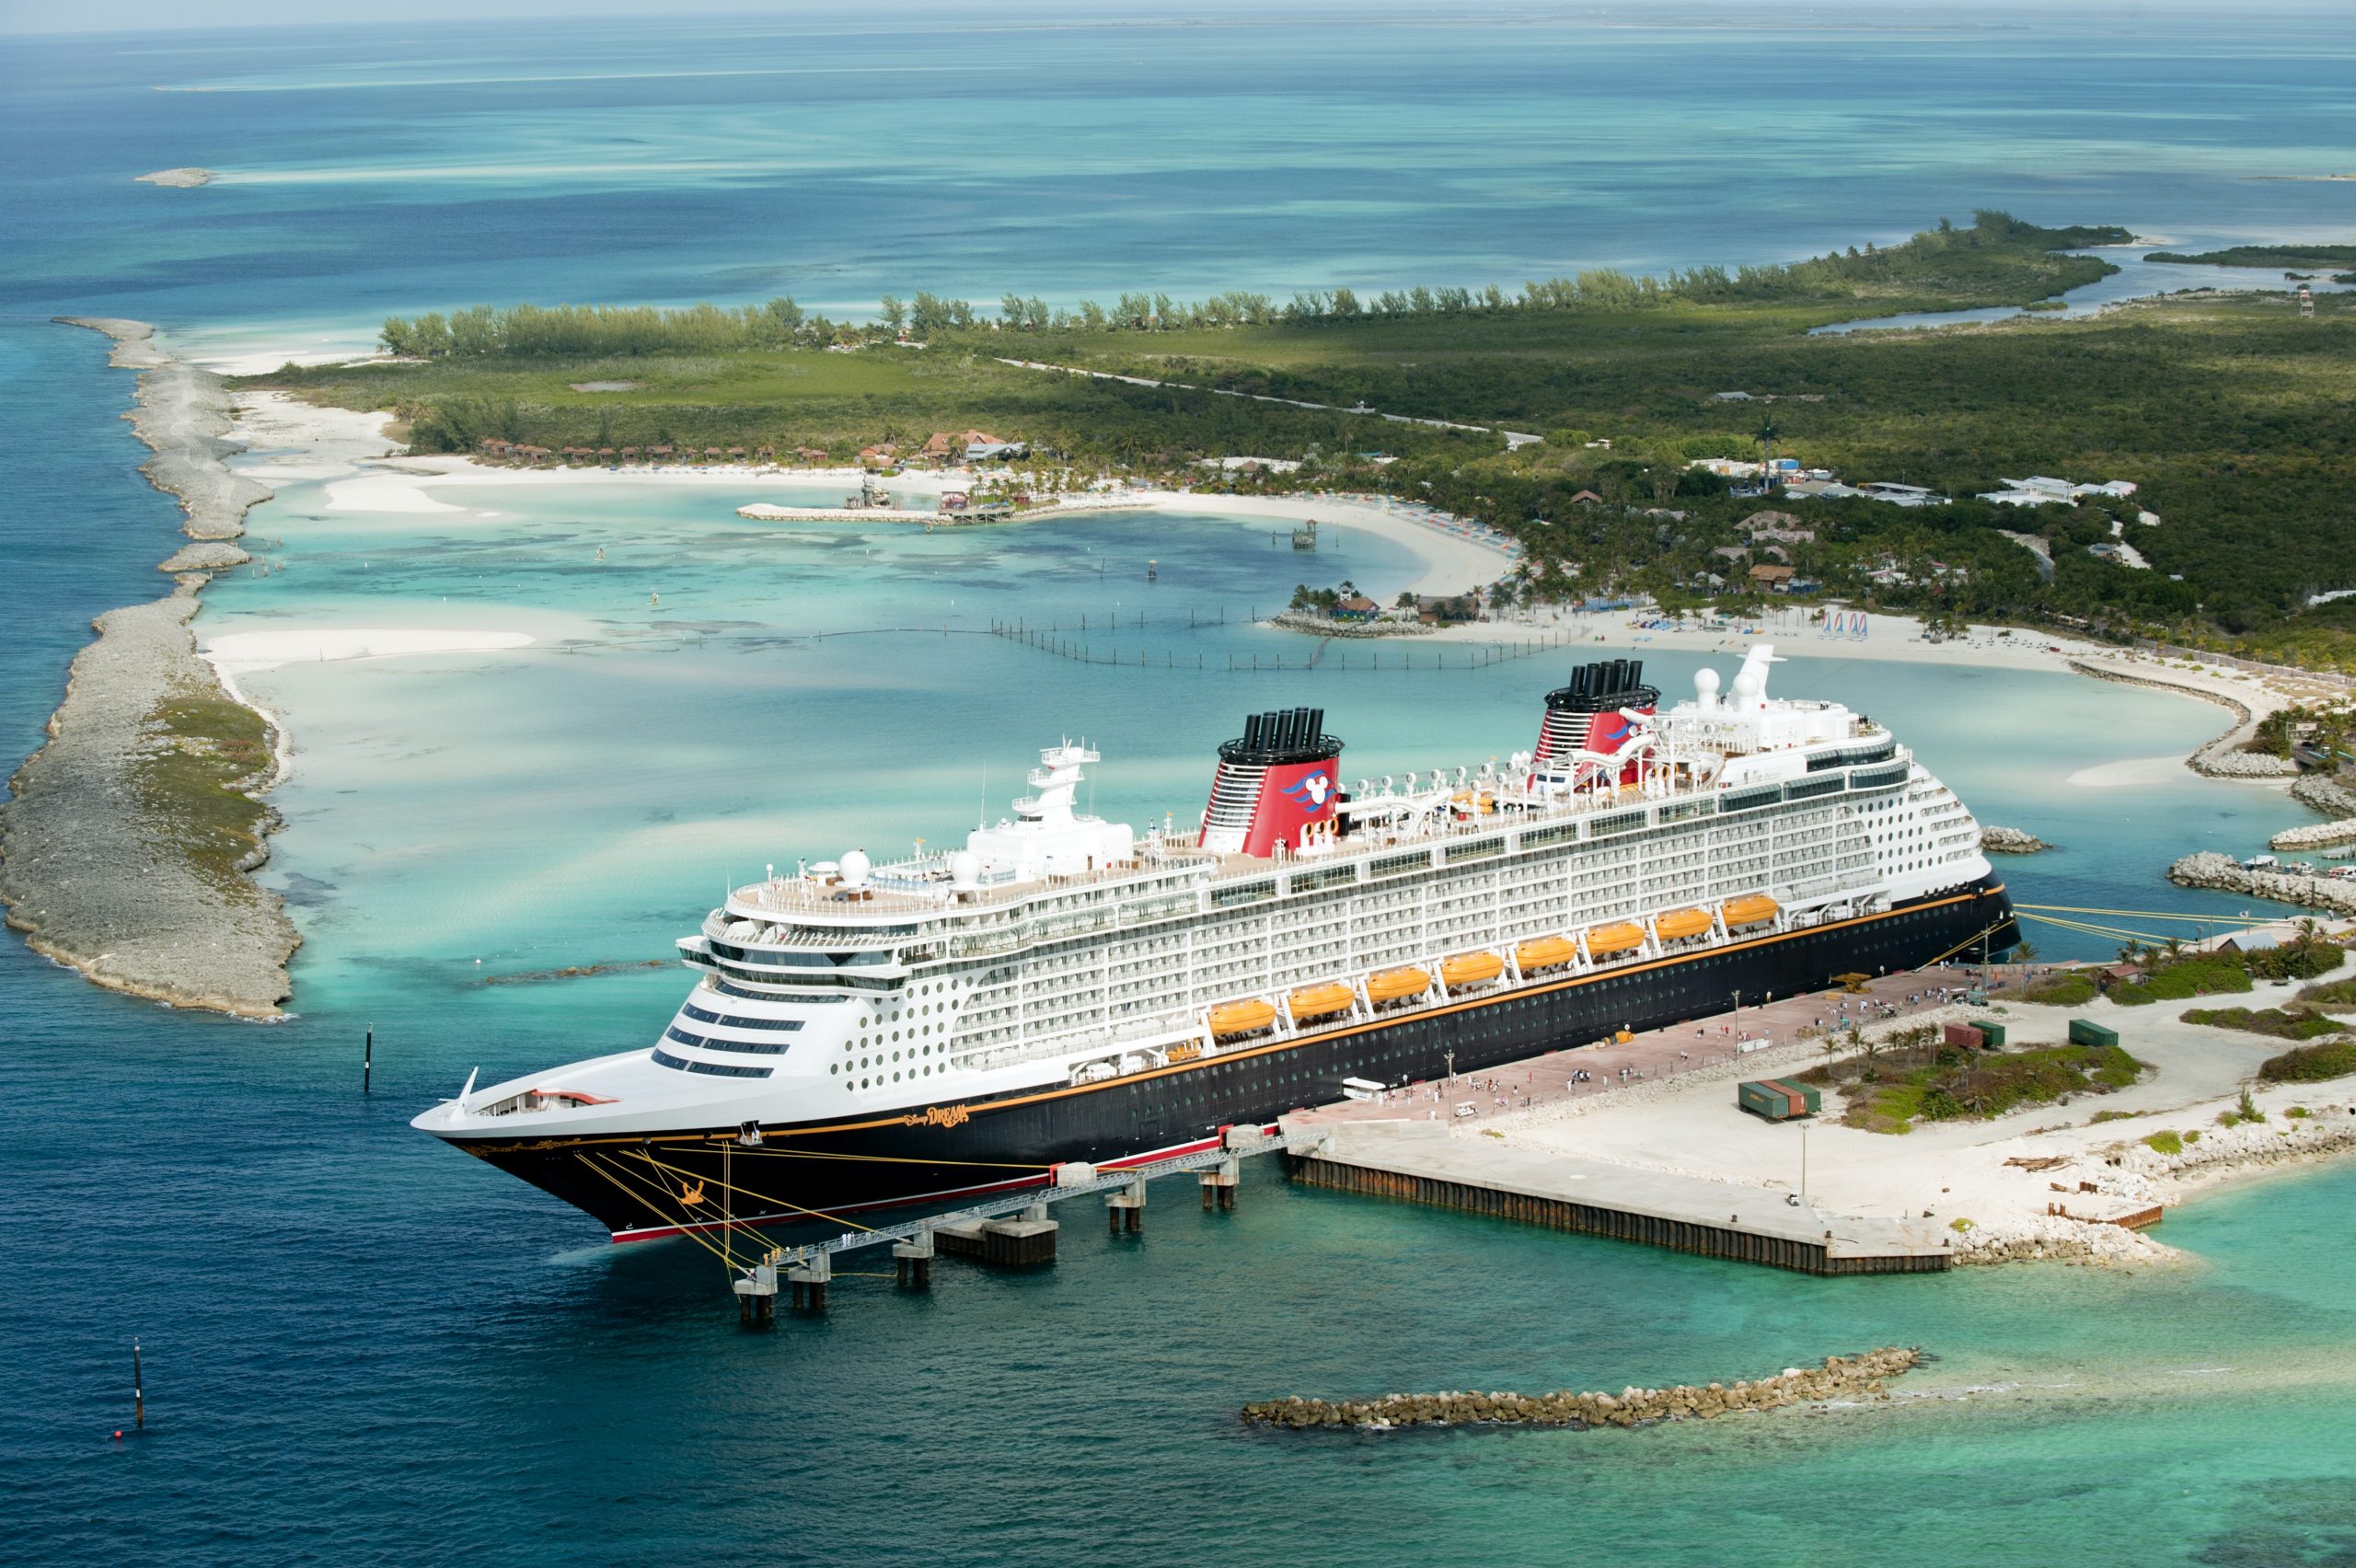 10 Essential Things to Know Before Visiting Castaway Cay